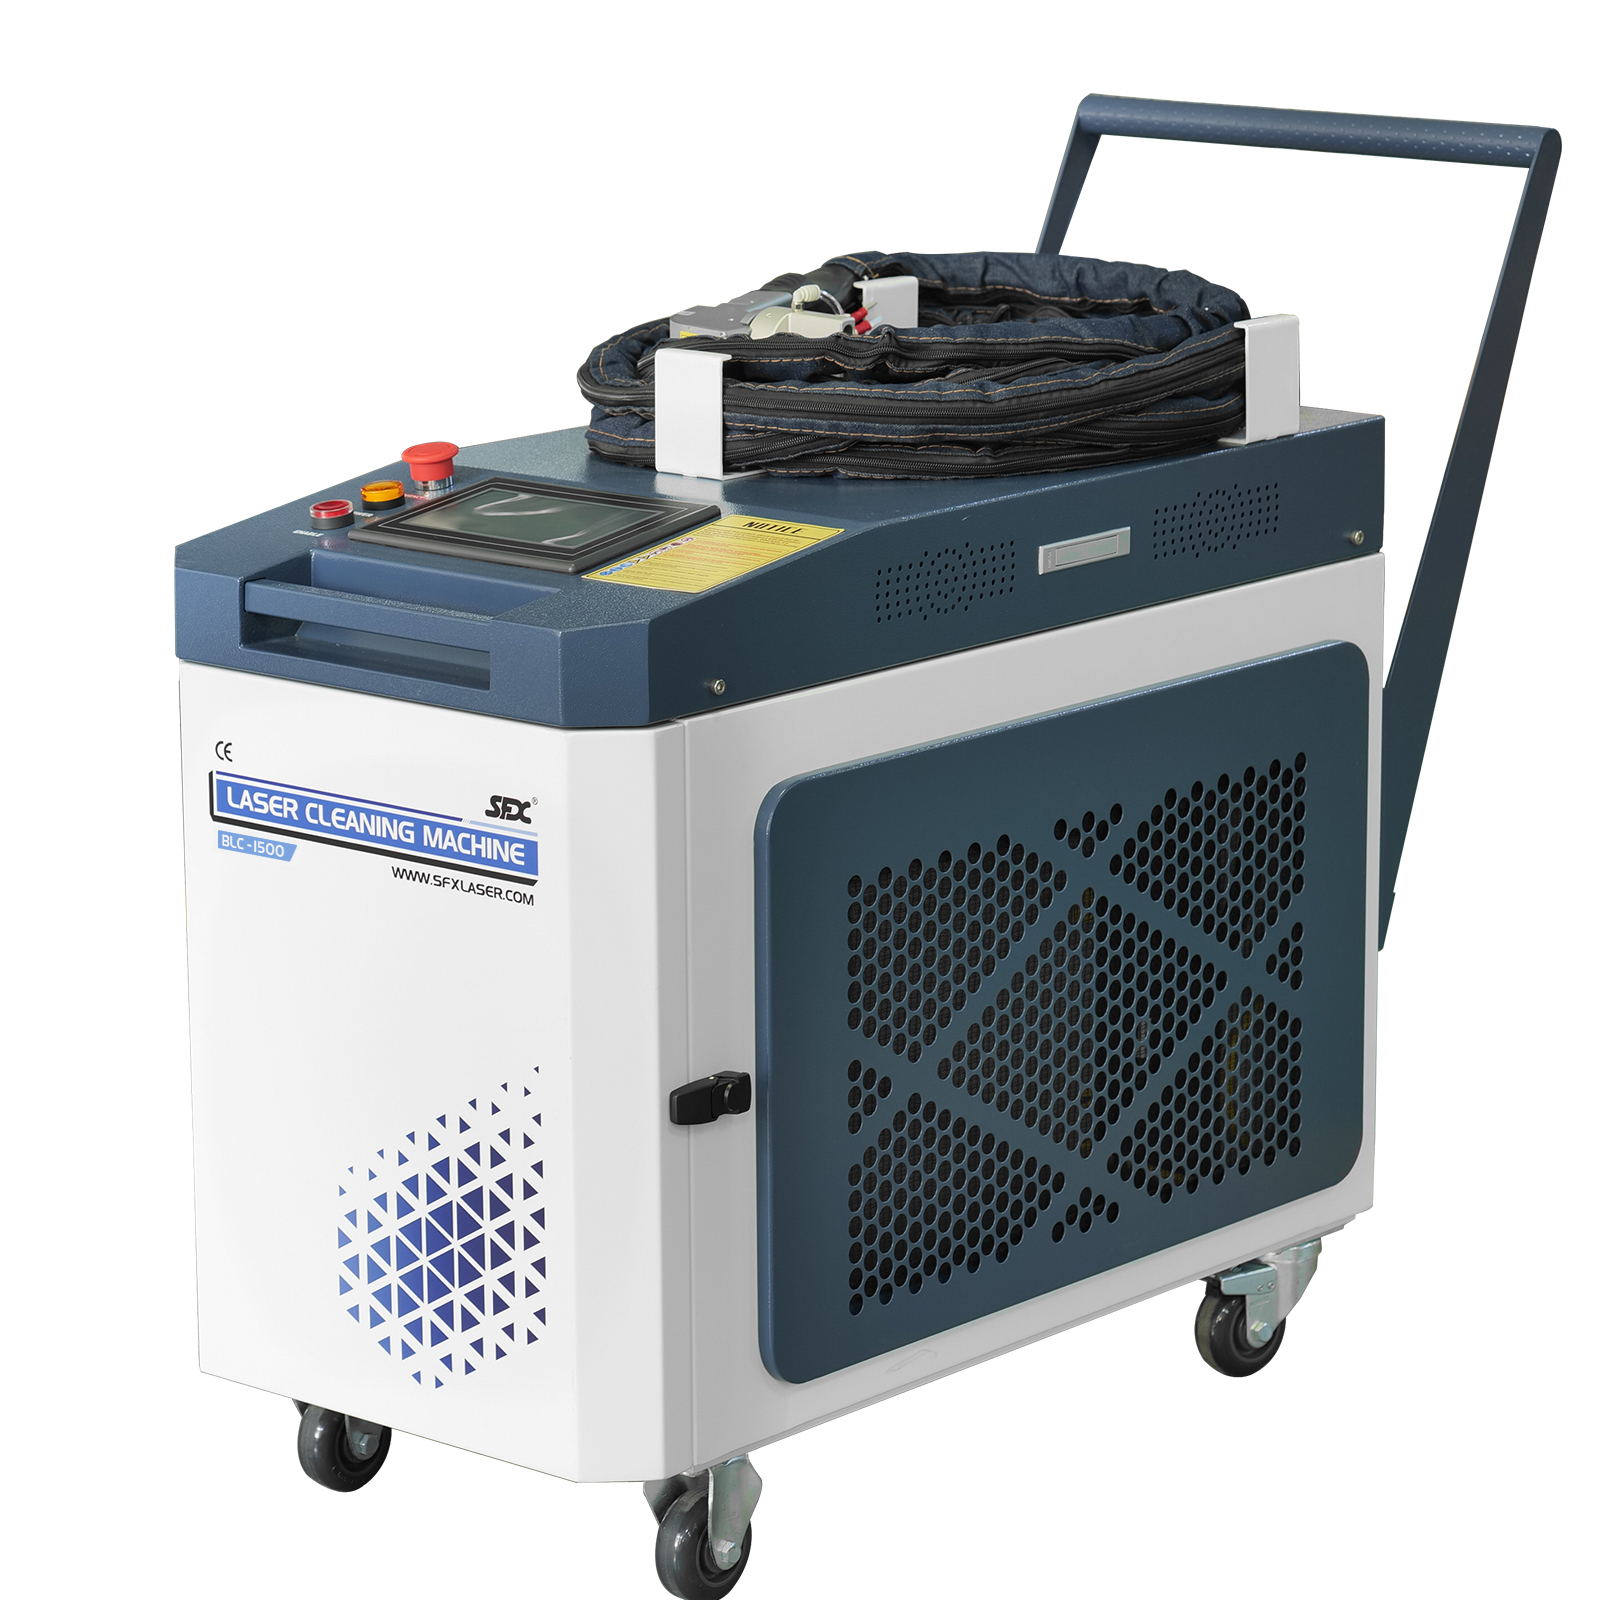 https://oss-us.xorder.com/globale/image/US_Los_Angeles/1978/oss/product/Max-laser-cleaner/BLC-Laser-Cleaner/BLC-1500%20Integrated%20Laser%20Cleaning%20Machine.jpeg